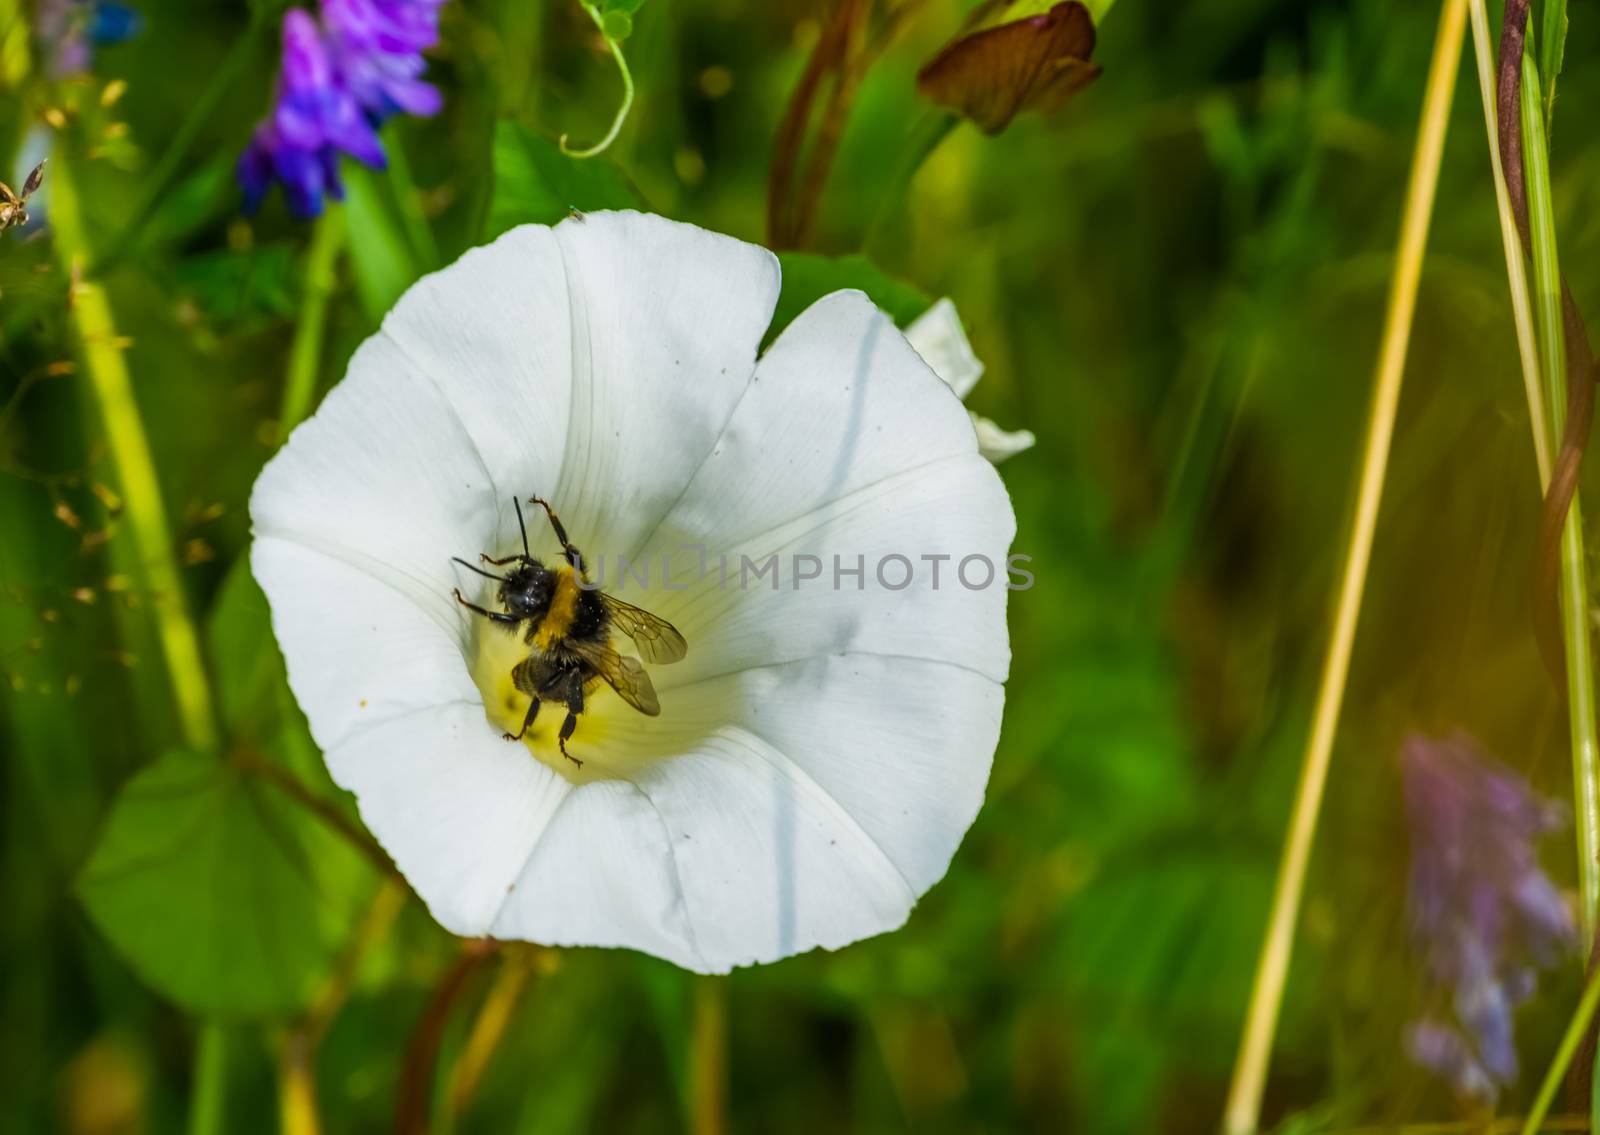 Closeup of a bee pollinating a heavenly trumpet flower, insect behavior, nature background